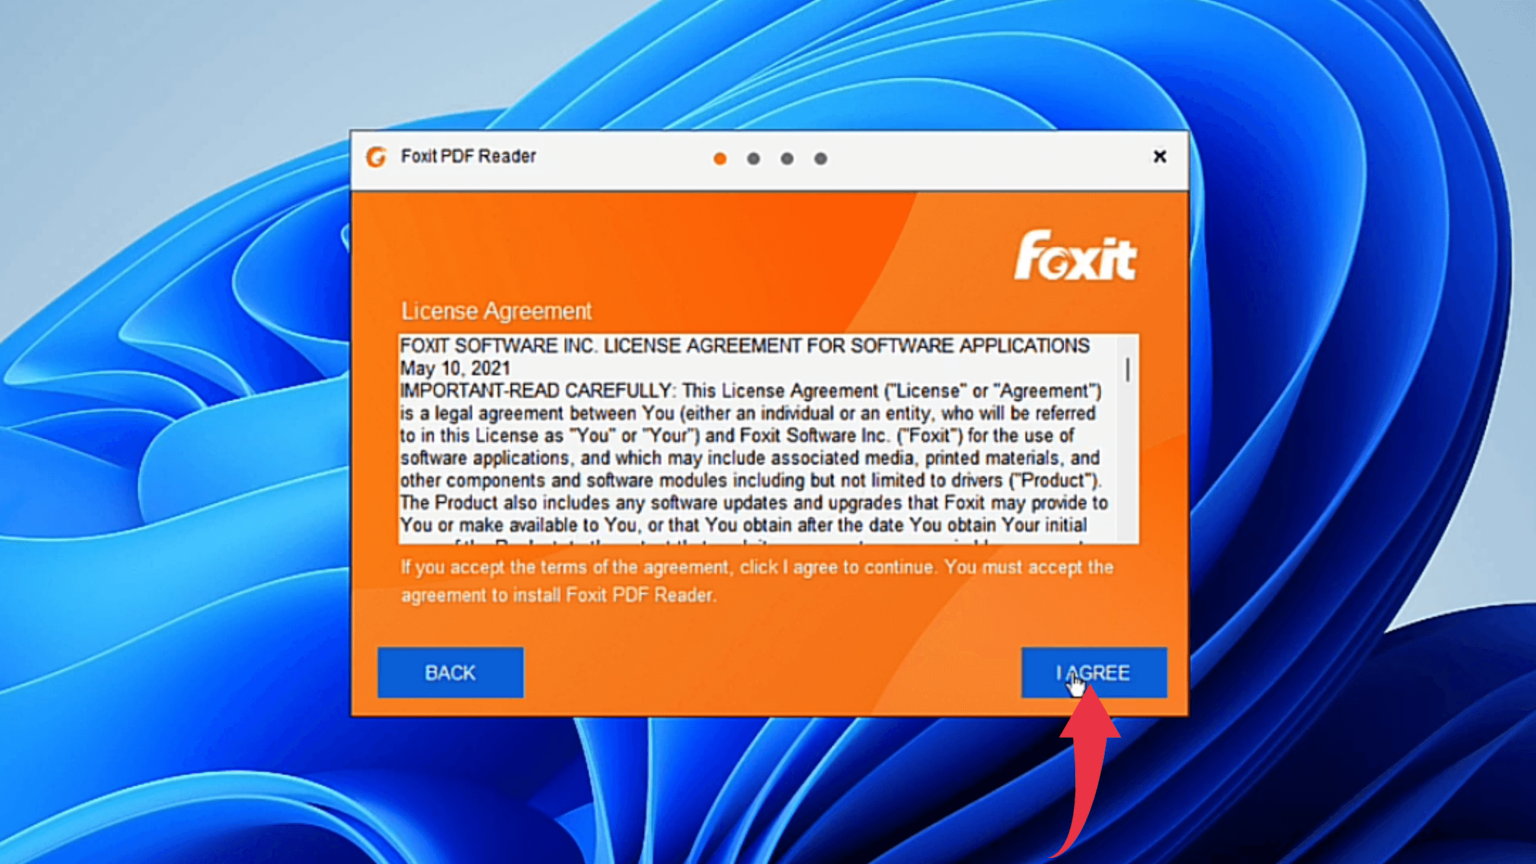 instal the last version for windows Foxit Reader 12.1.2.15332 + 2023.2.0.21408